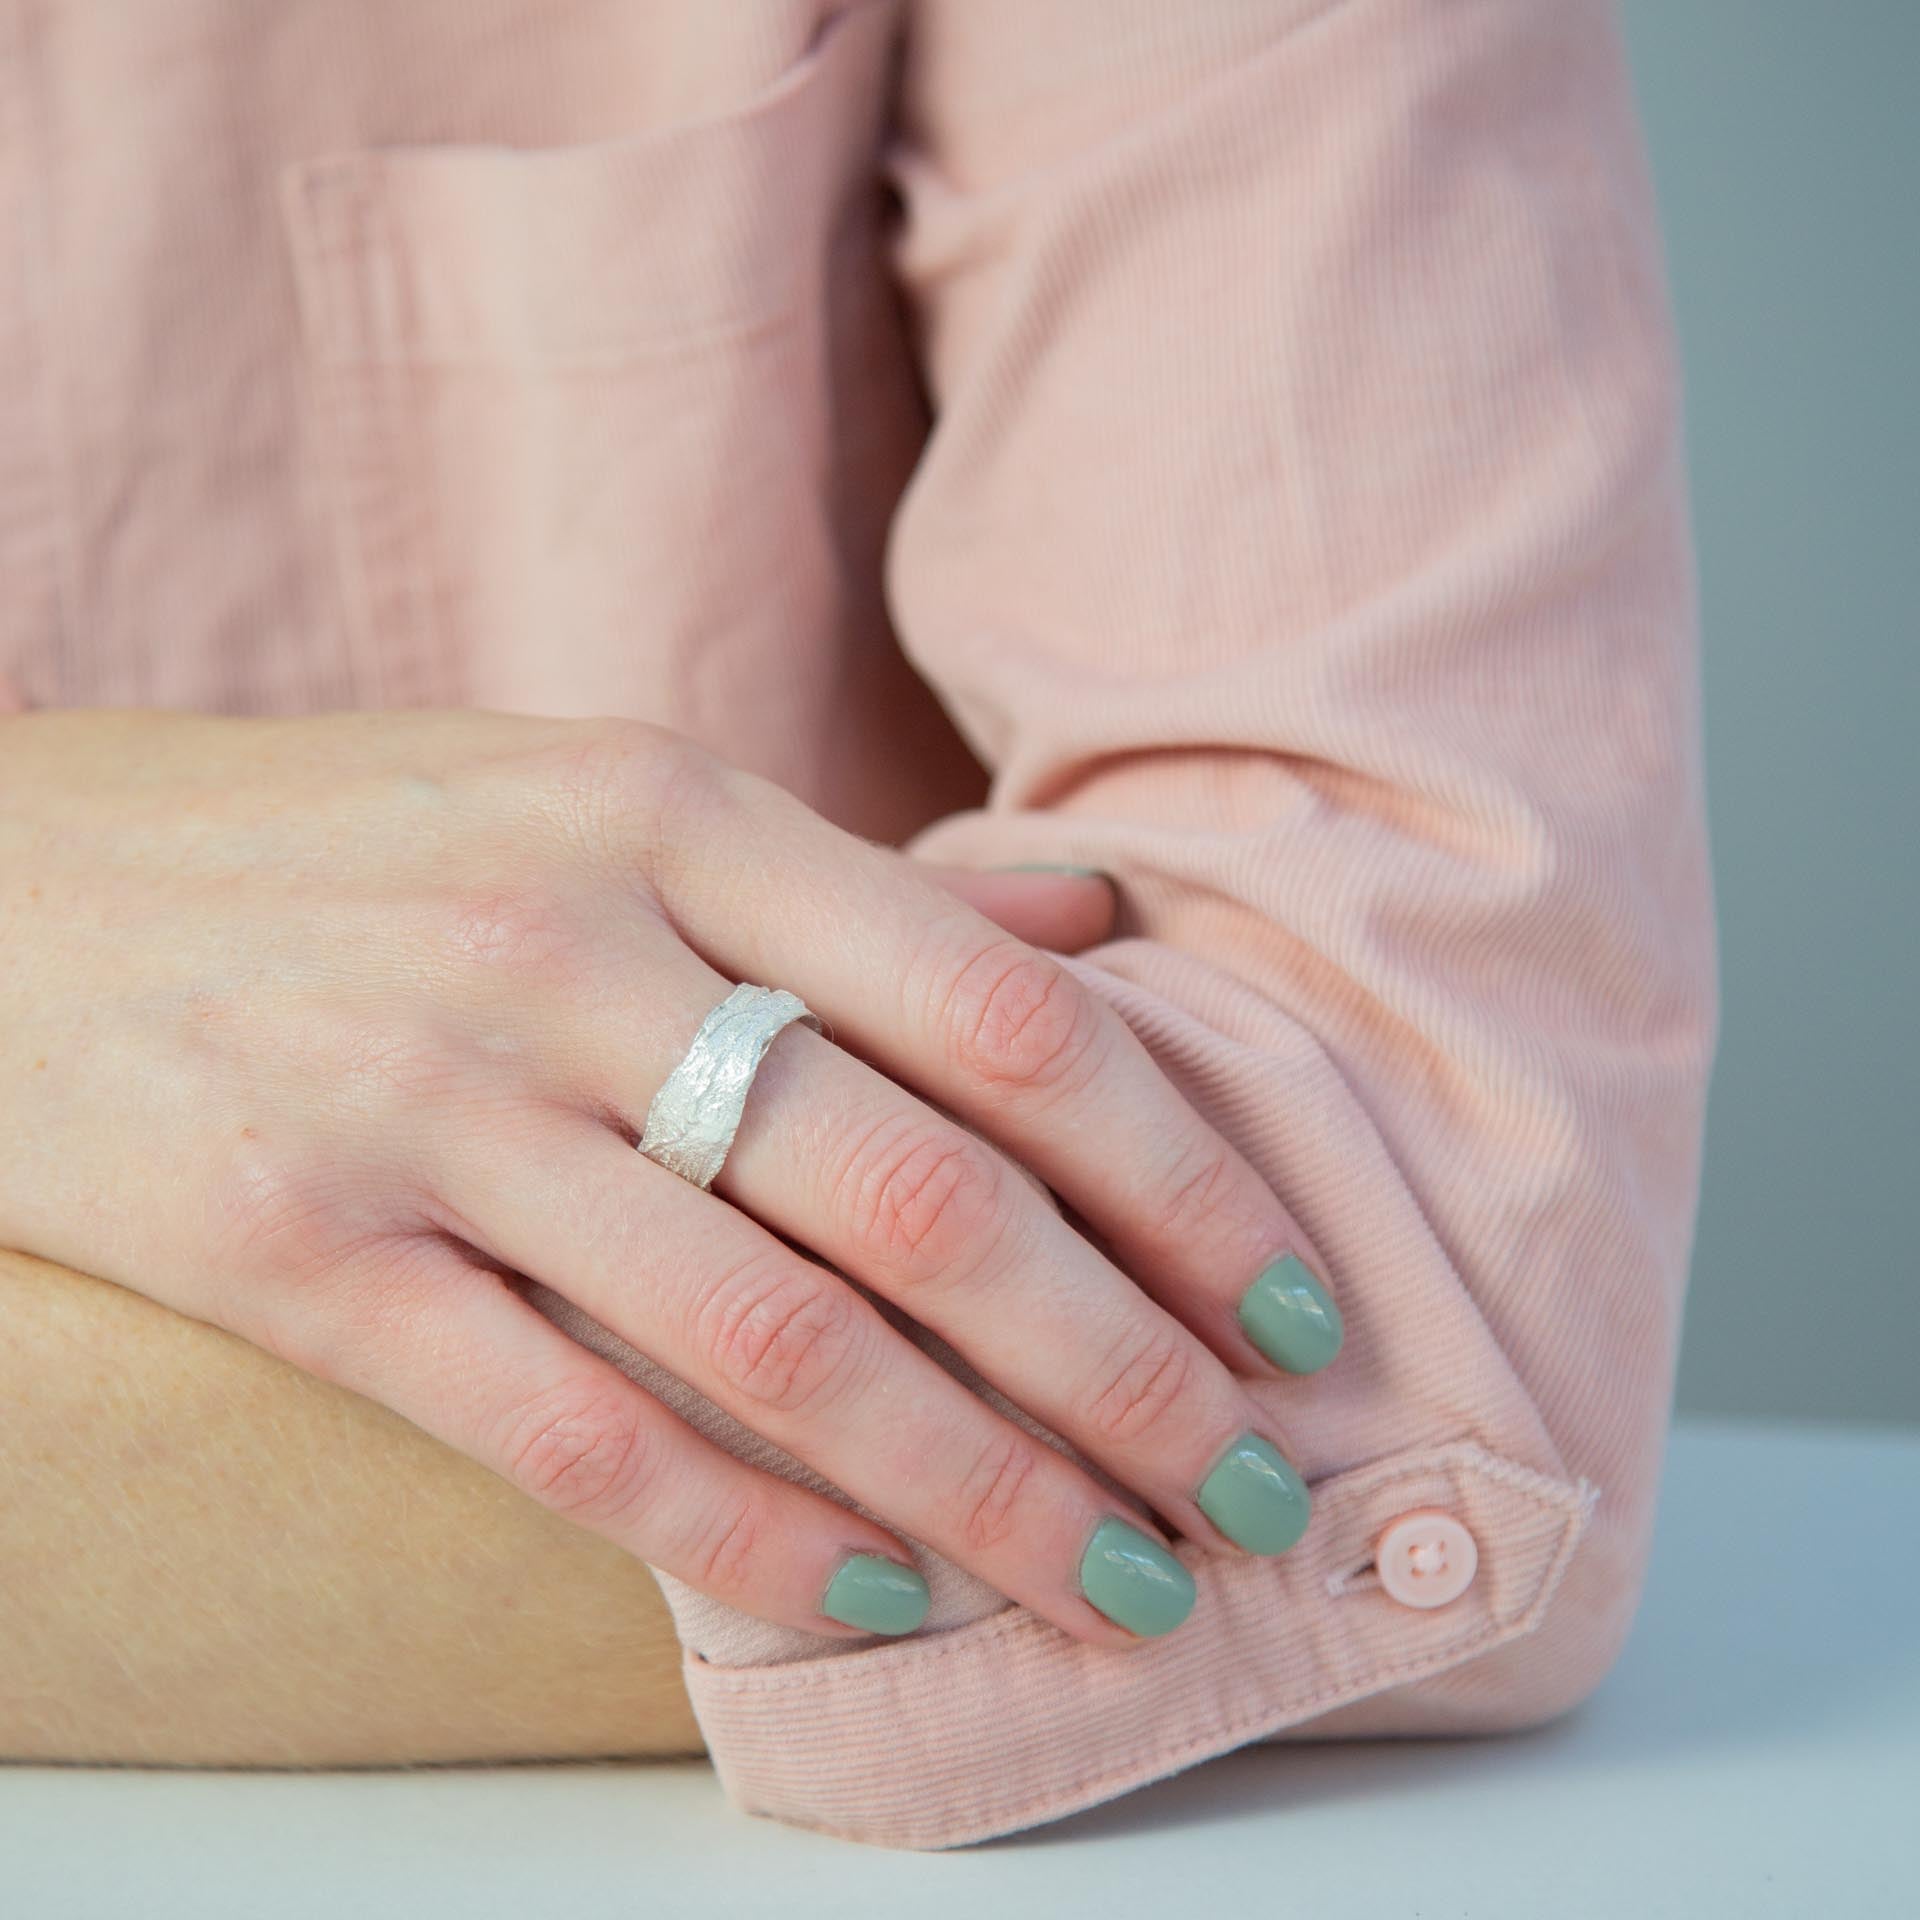 Snow Drop Leaf Wrap Ring modelled on hand resting on arm with pink shirt